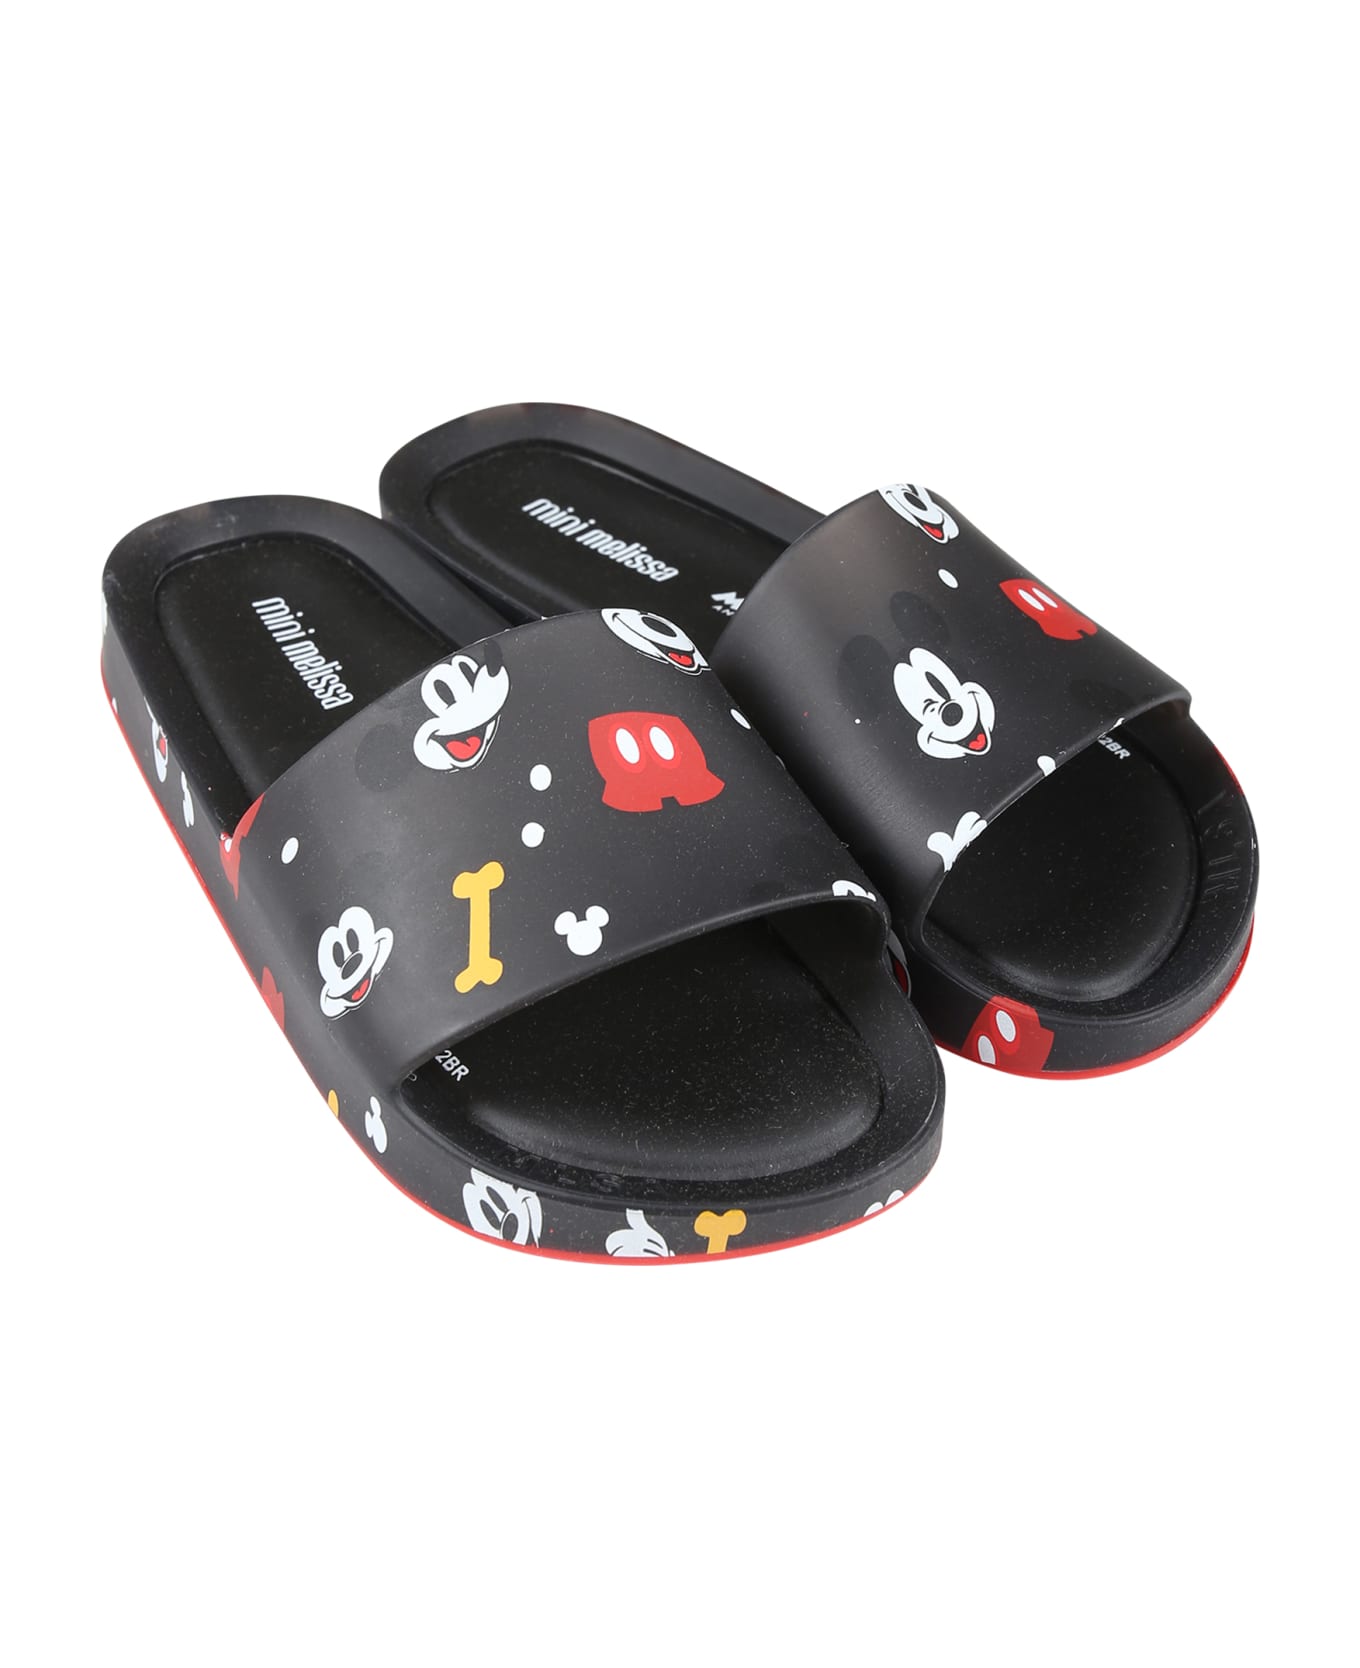 Melissa Black Slippers For Kids With Micki Mouse - Black